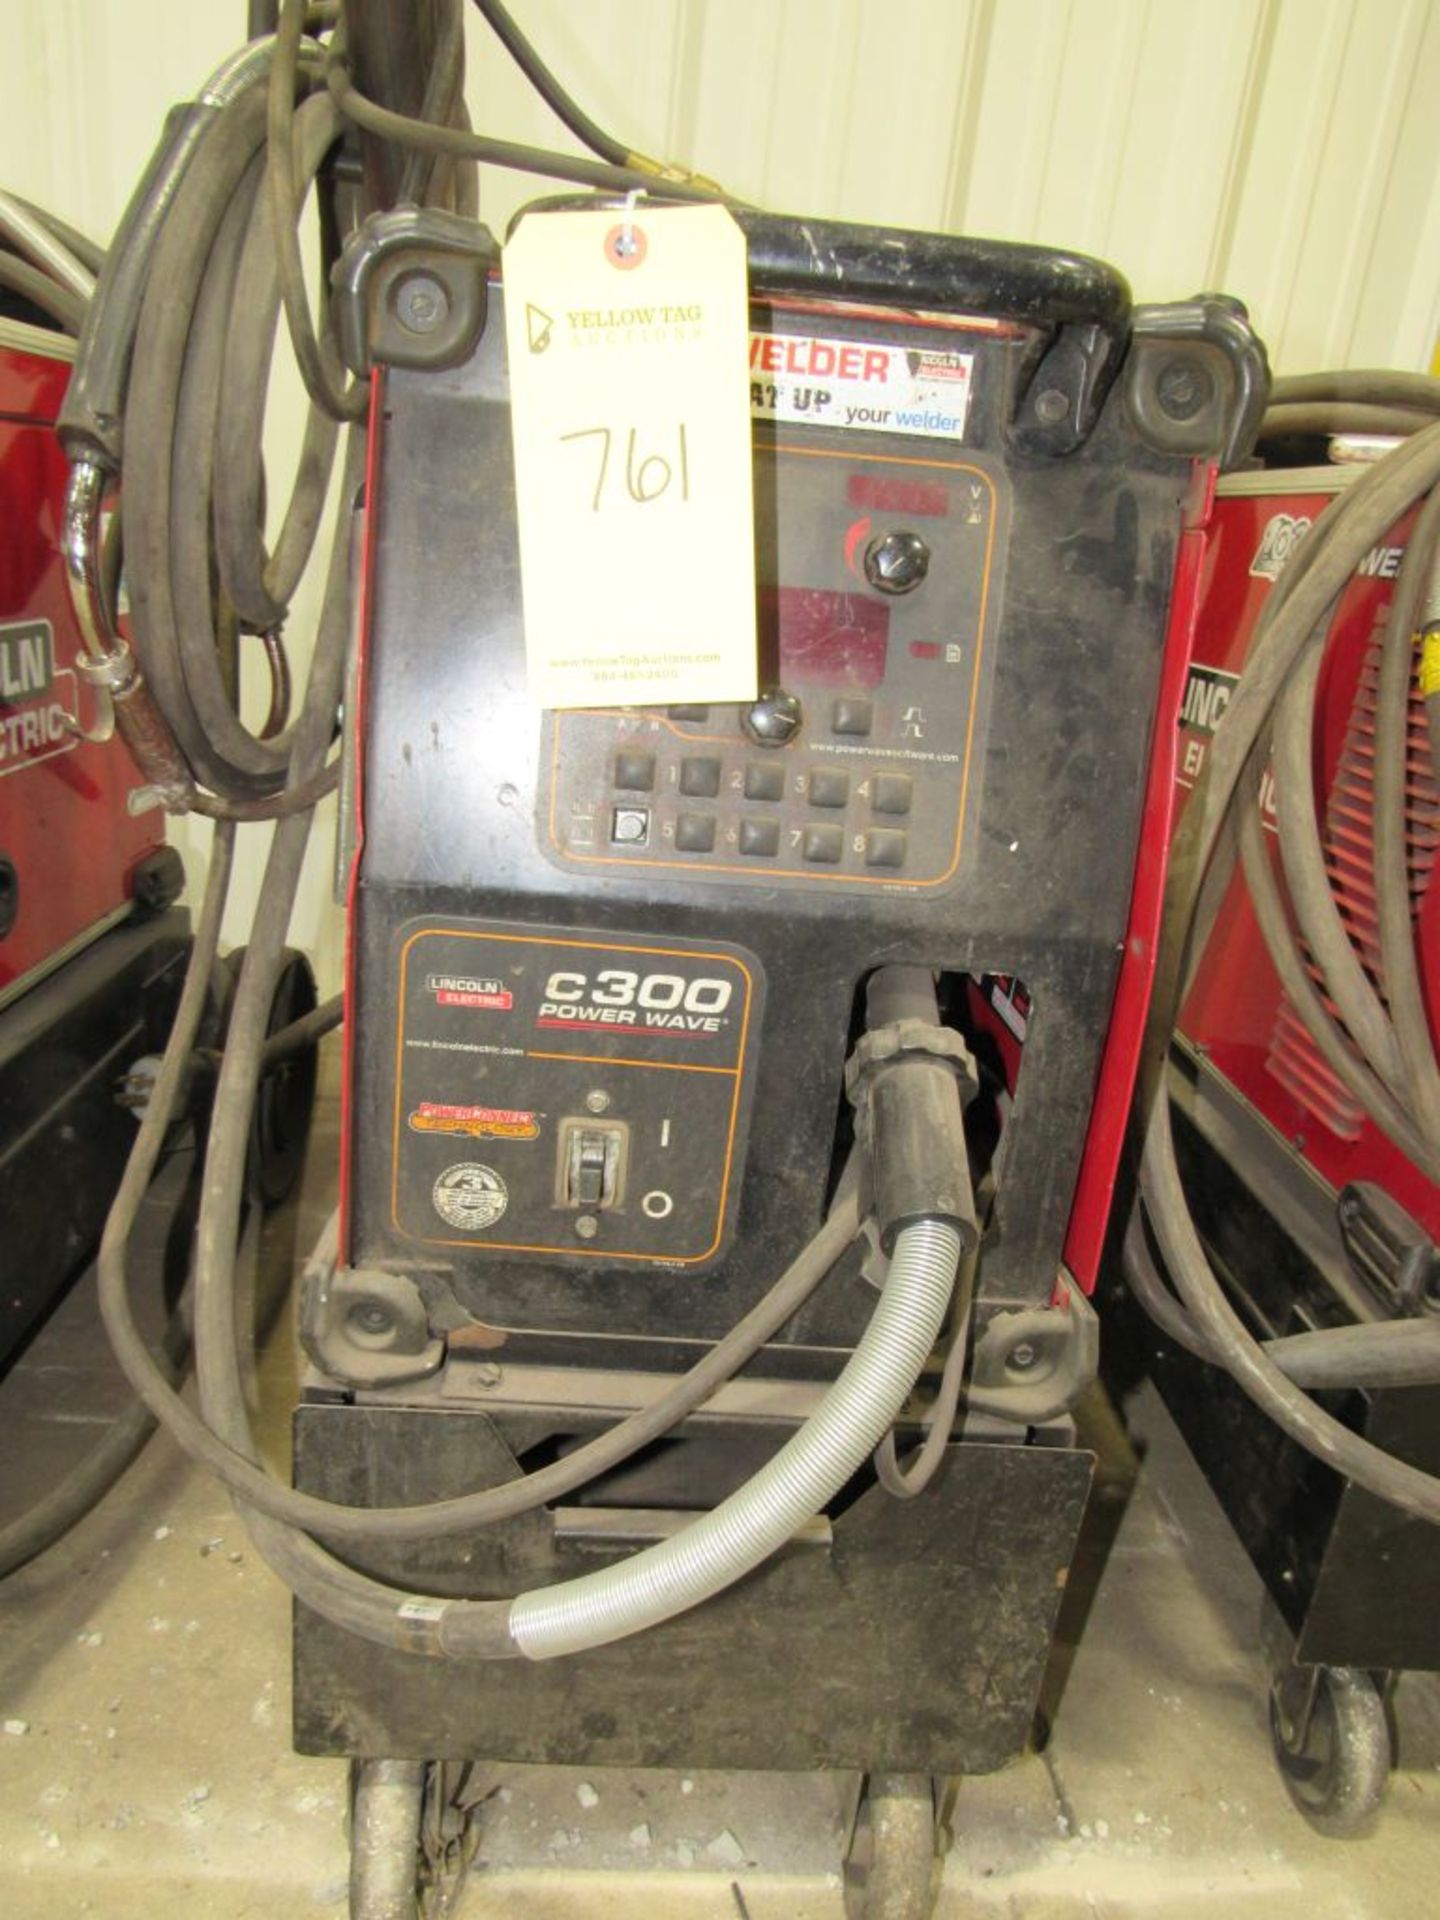 Lincoln C300 Power Wave Welder|Tag: 234761